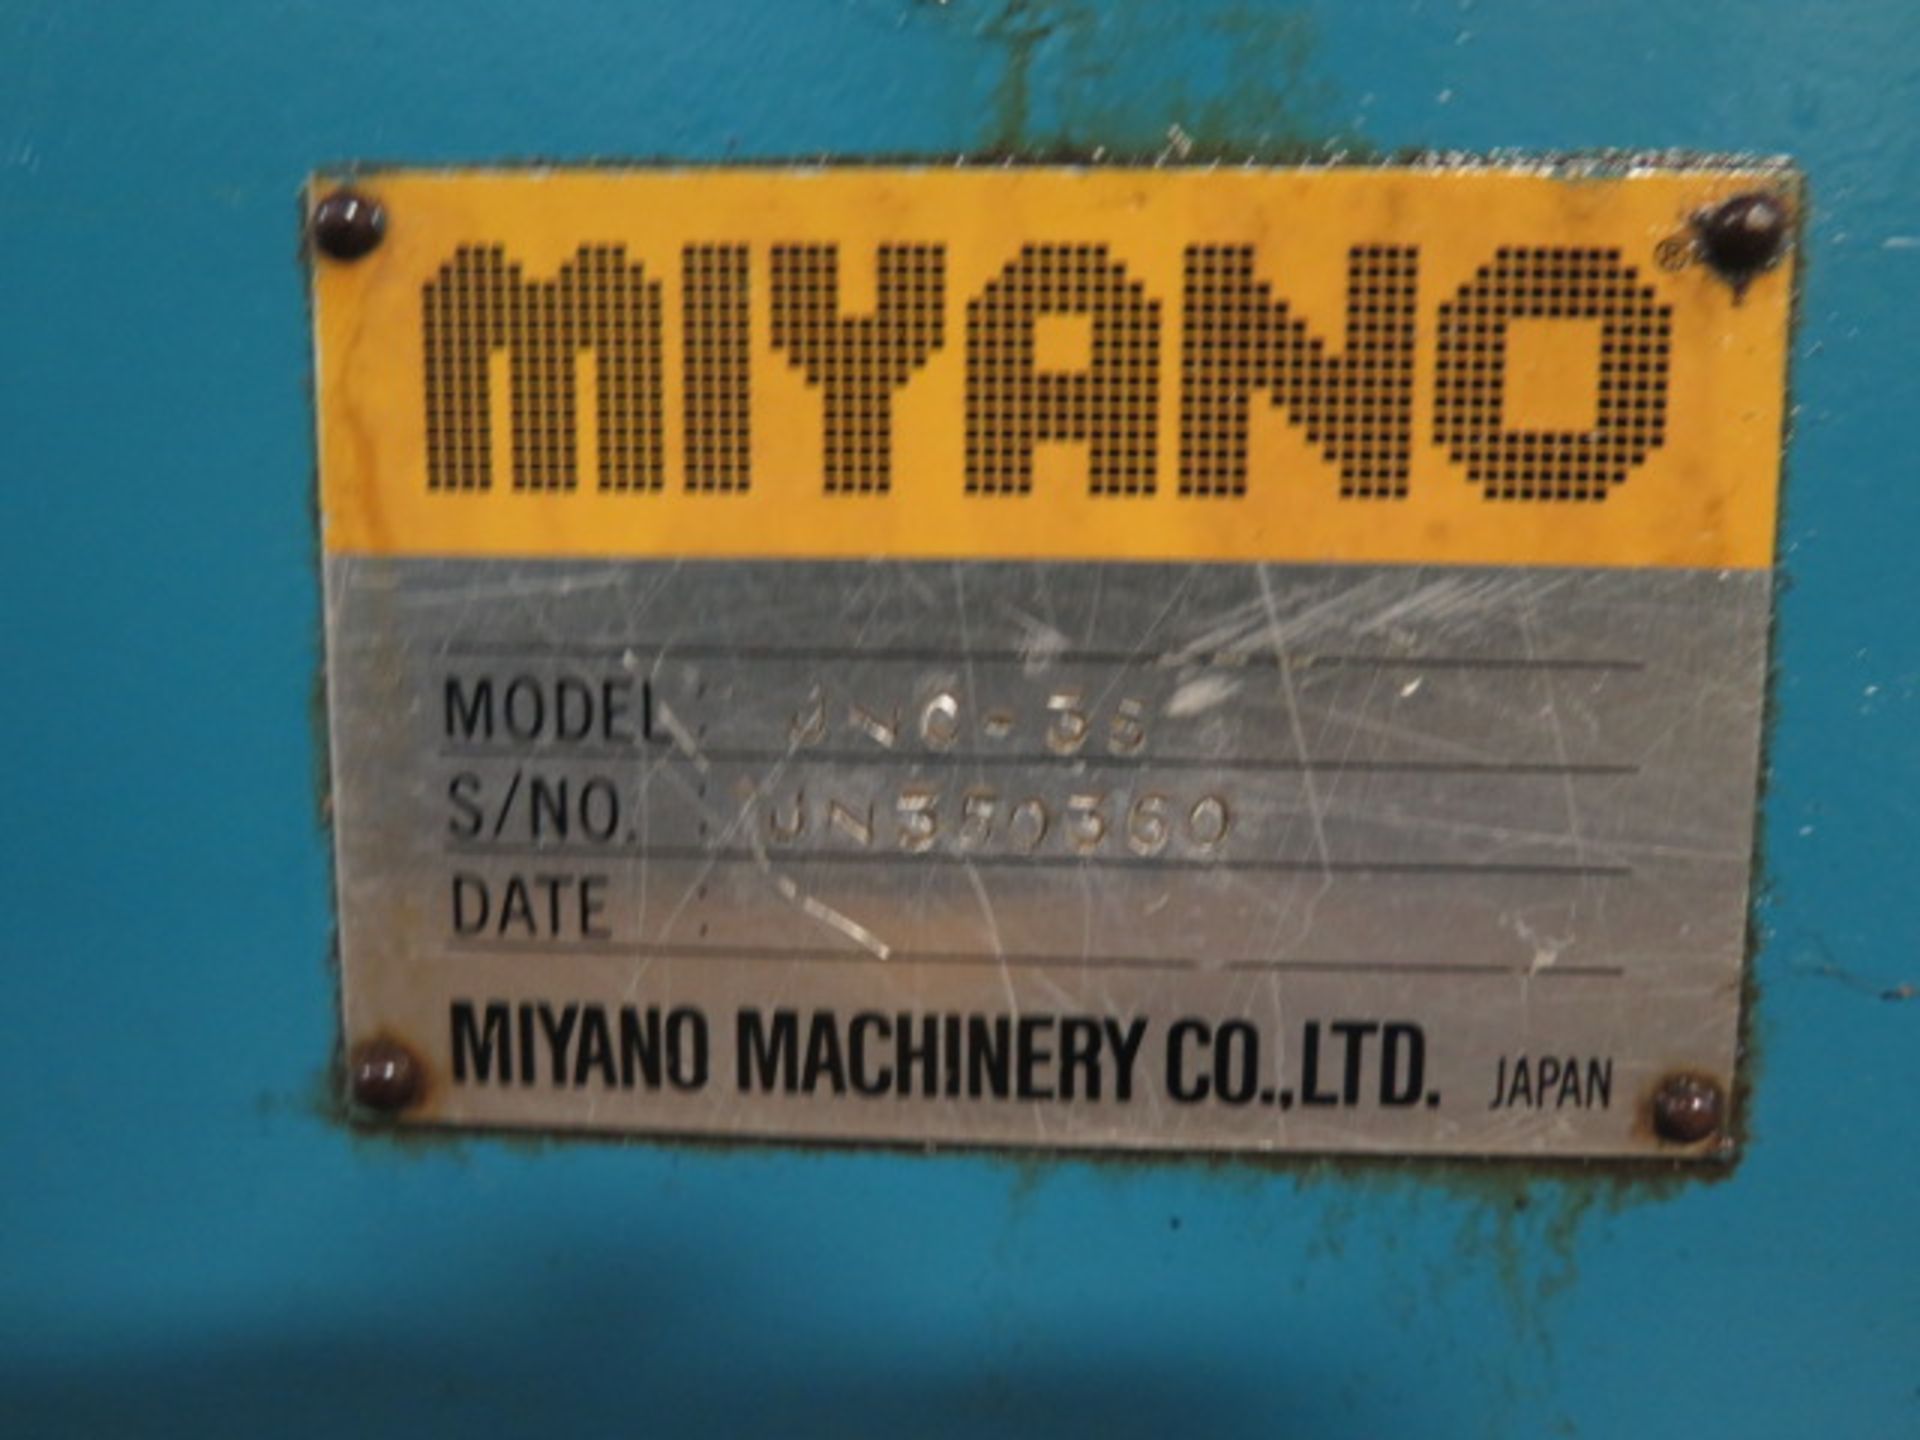 Miyano JNC-35 CNC Turning Center s/n JN350360 w/ Fanuc System 10T Controls, 8-Station, SOLD AS IS - Image 11 of 11